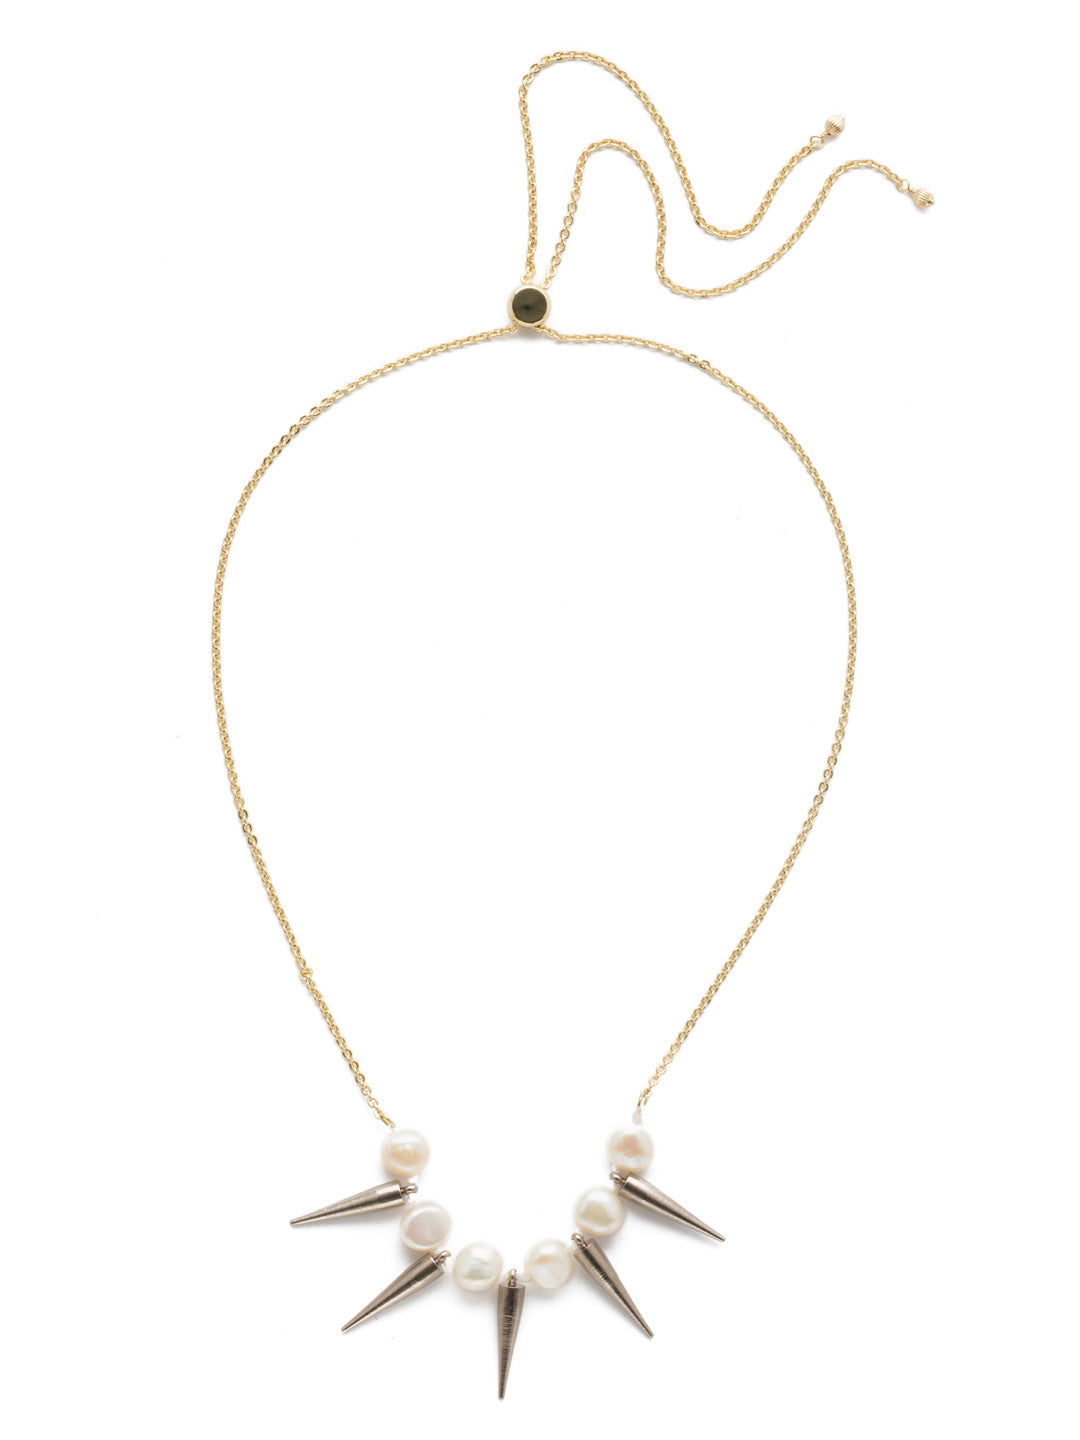 Hera Classic Necklace Tennis Necklace - 4NEF13MXMDP - <p>Pair this trendy adjustable necklace with style staples. A mix of soft and hard elements, it's a testament to your multi-dimensional personality. From Sorrelli's Modern Pearl collection in our Mixed Metal finish.</p>